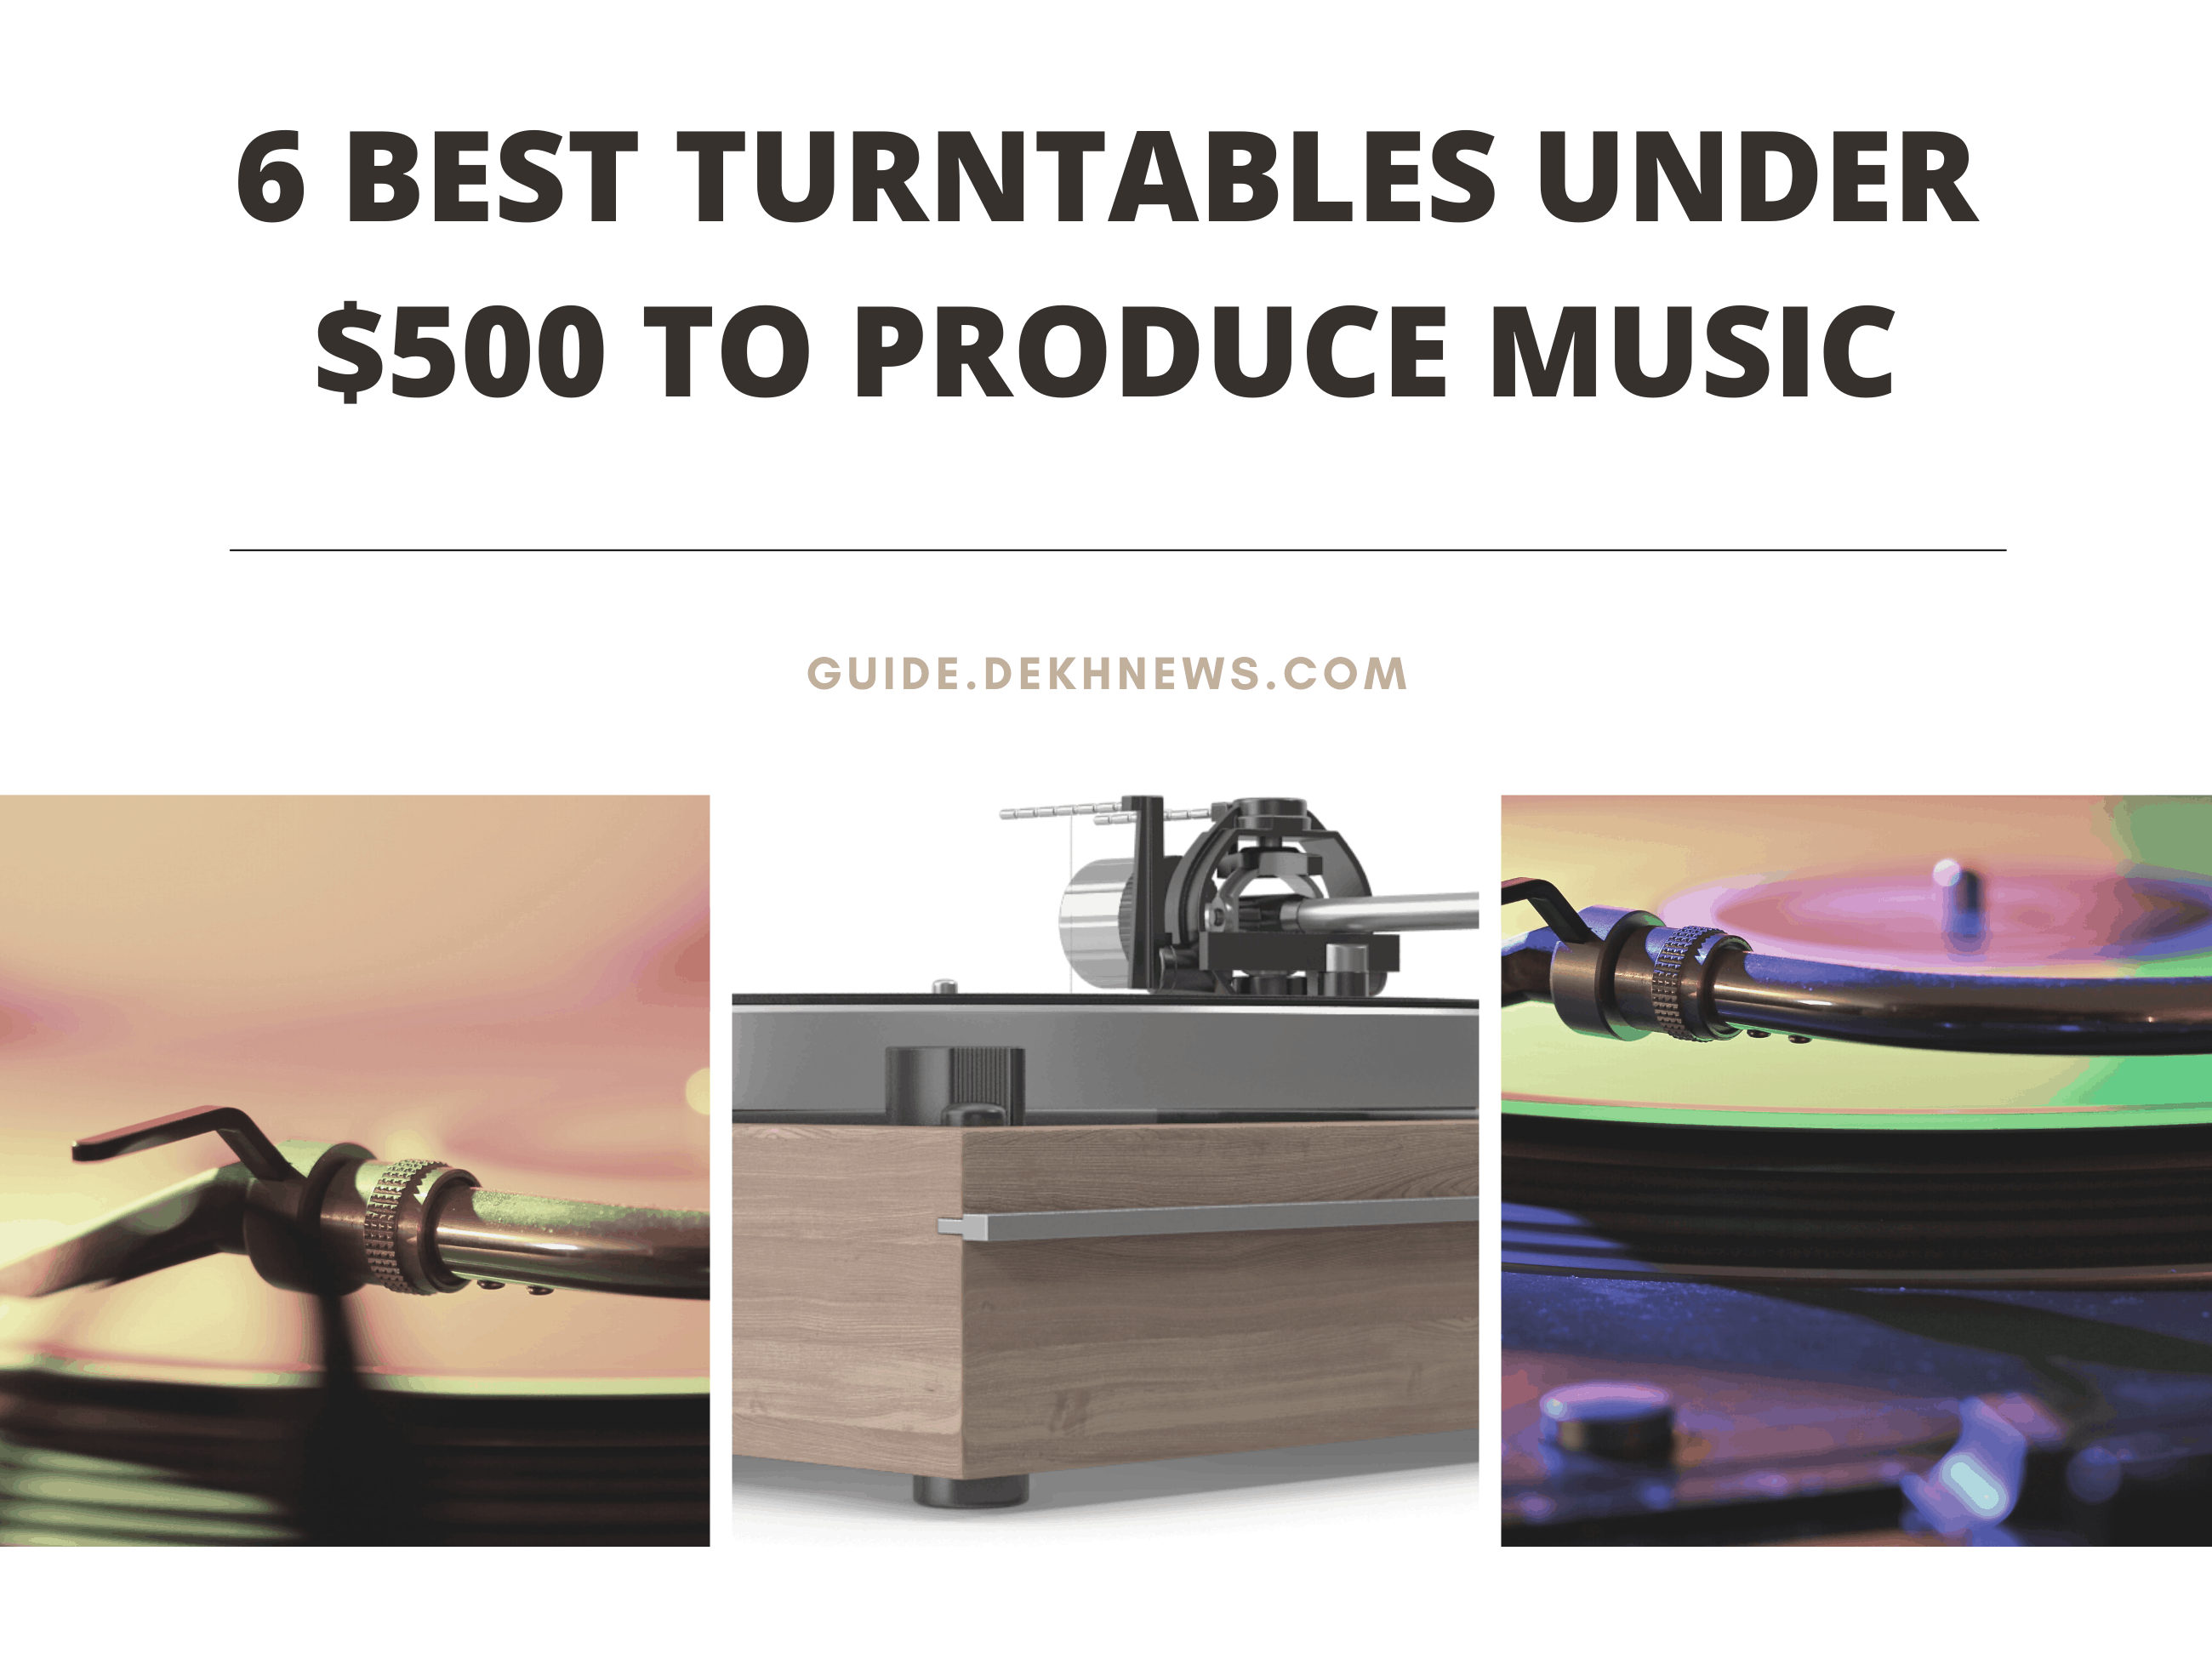 6-Best-Turntables-under-500-to-Produce-Music.